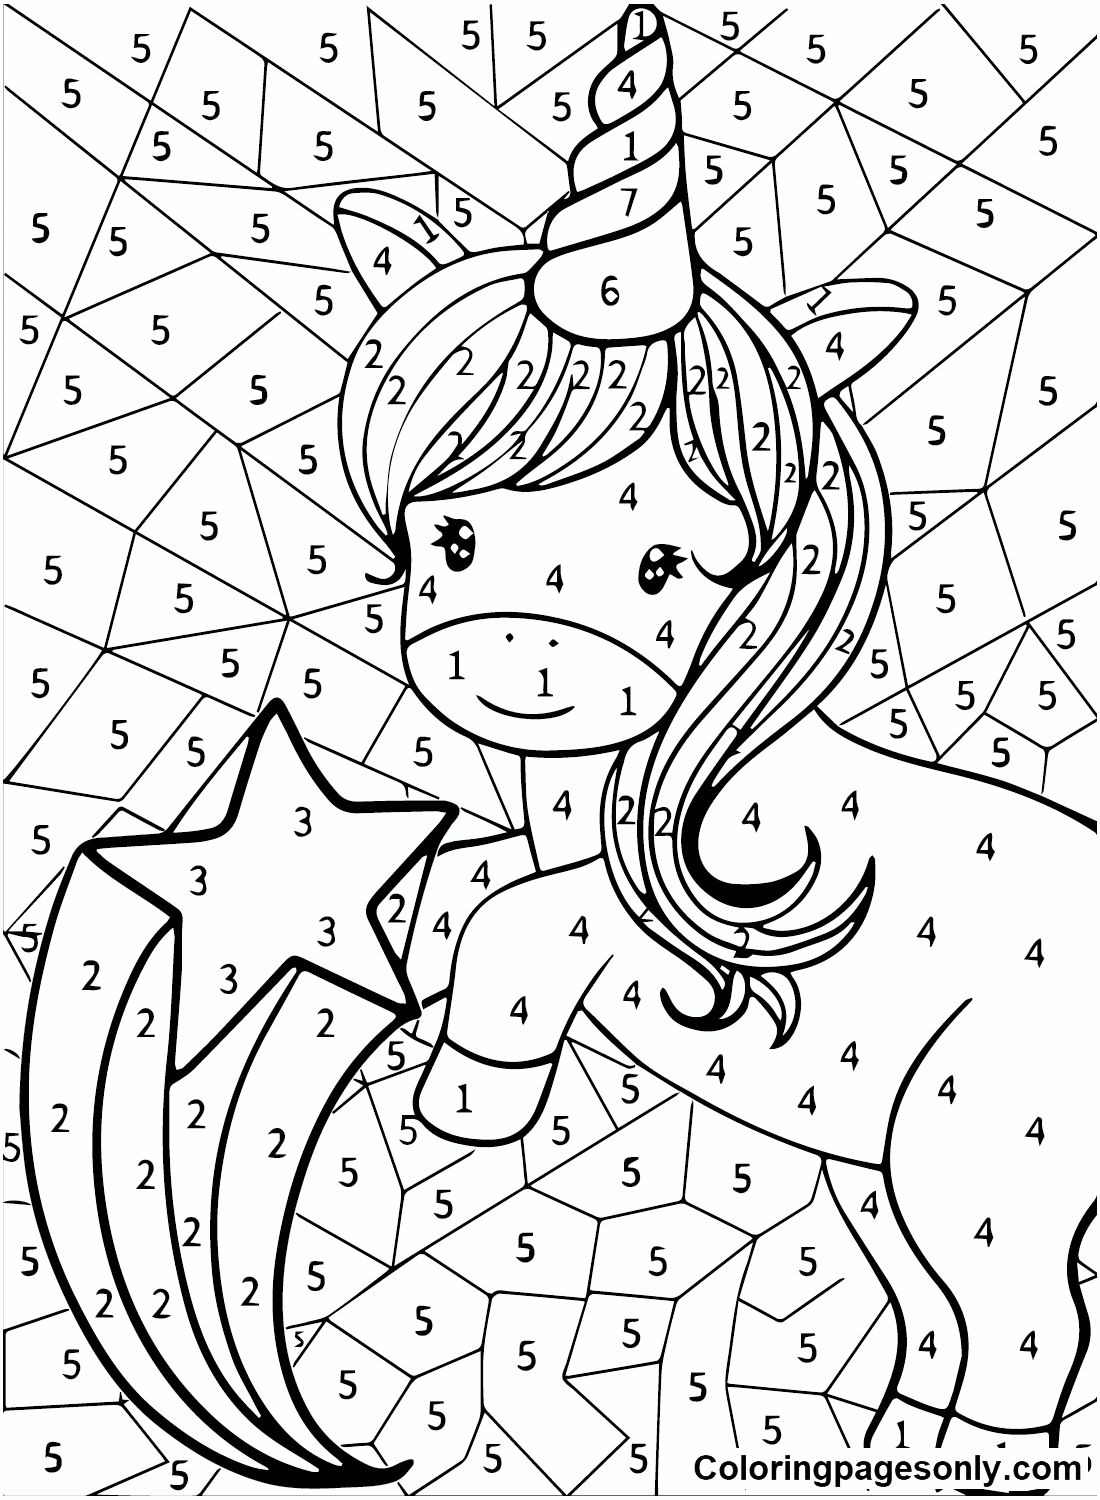 Unicorn color by number coloring pages printable for free download